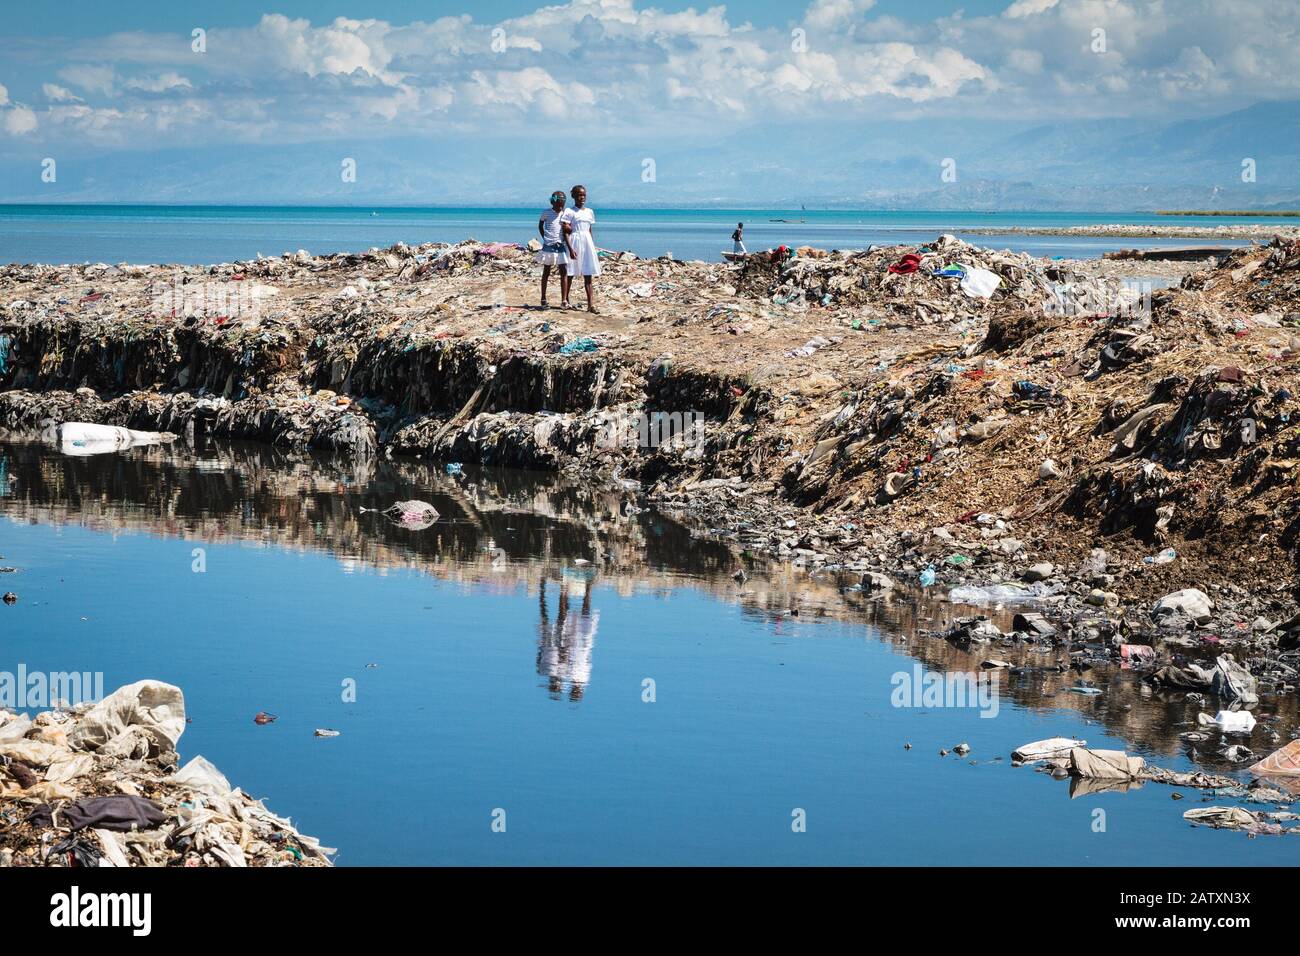 Girls on a huge mountain of rubbish on the coast, Cite Soleil, Port-au-Prince, Ouest, Haiti Stock Photo